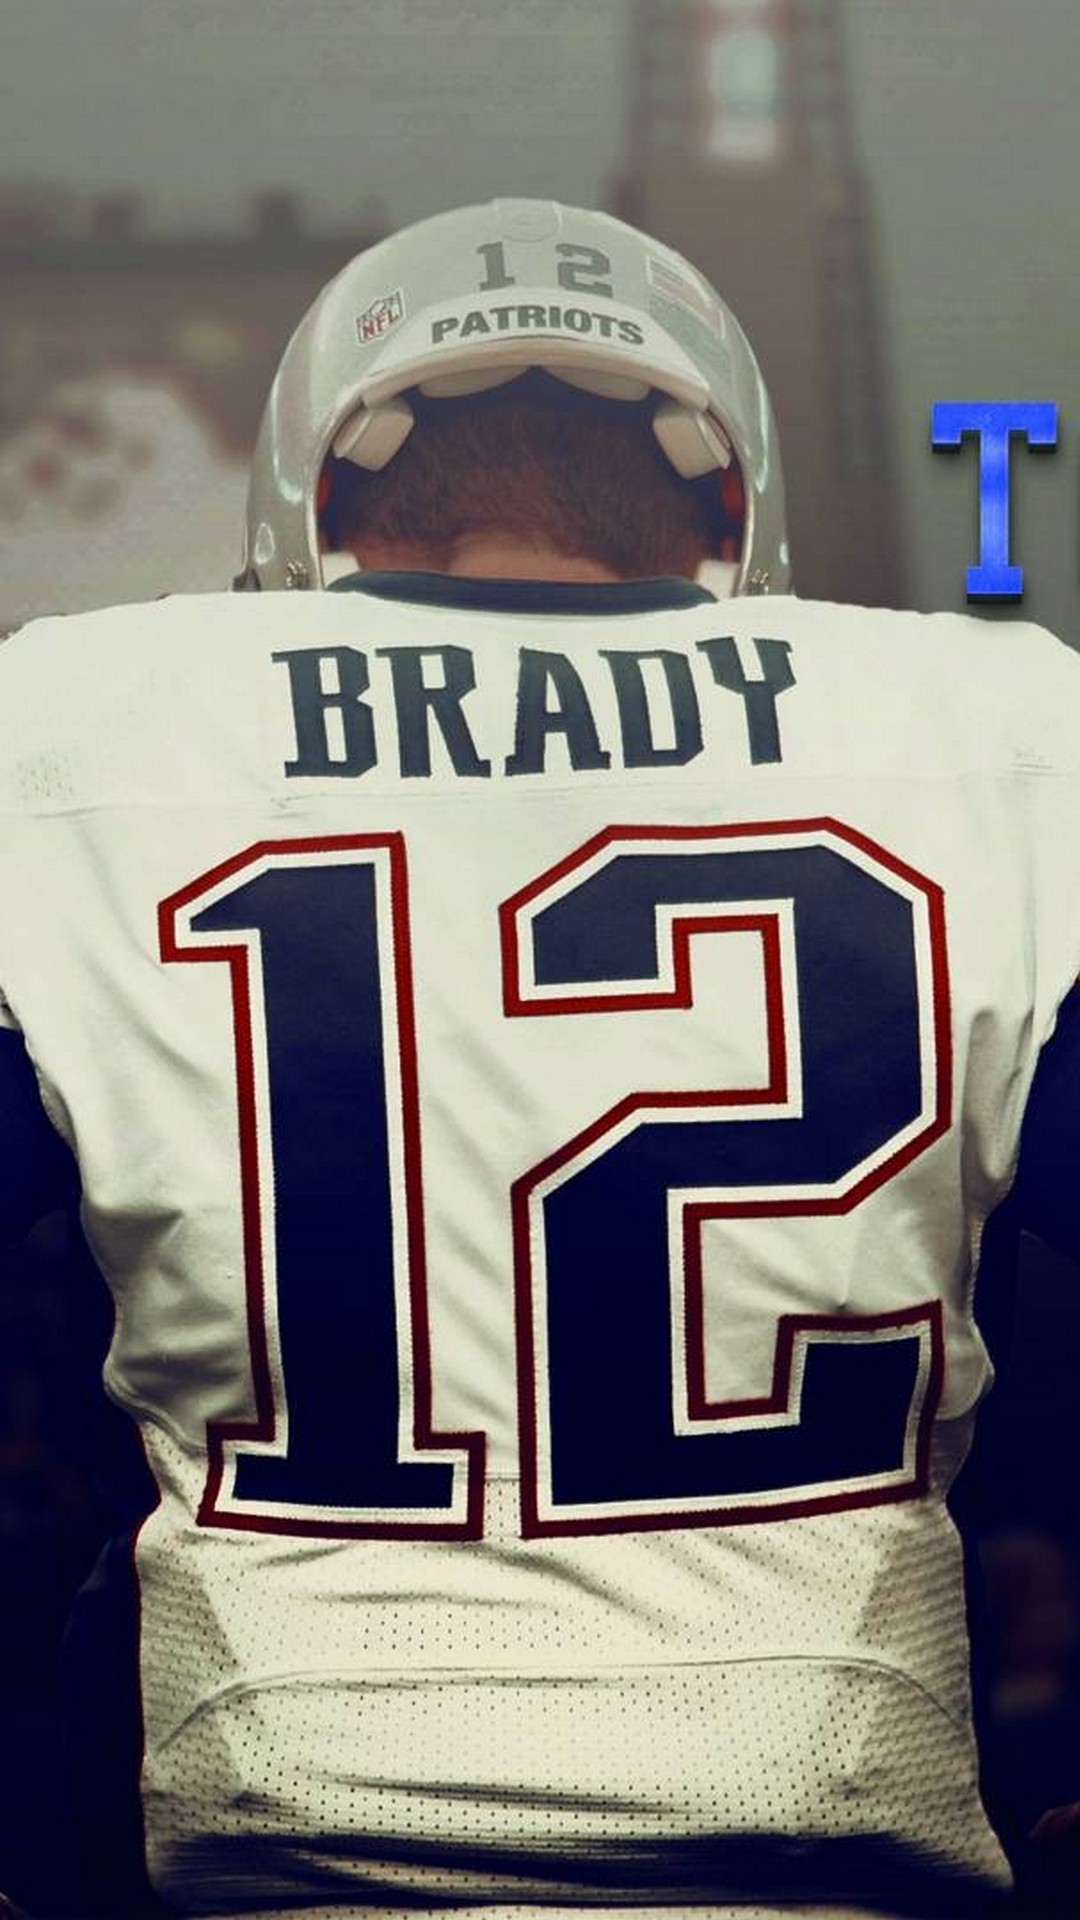 iPhone 7 Wallpaper Tom Brady Goat With high-resolution 1080X1920 pixel. You can use this wallpaper for your iPhone 5, 6, 7, 8, X, XS, XR backgrounds, Mobile Screensaver, or iPad Lock Screen